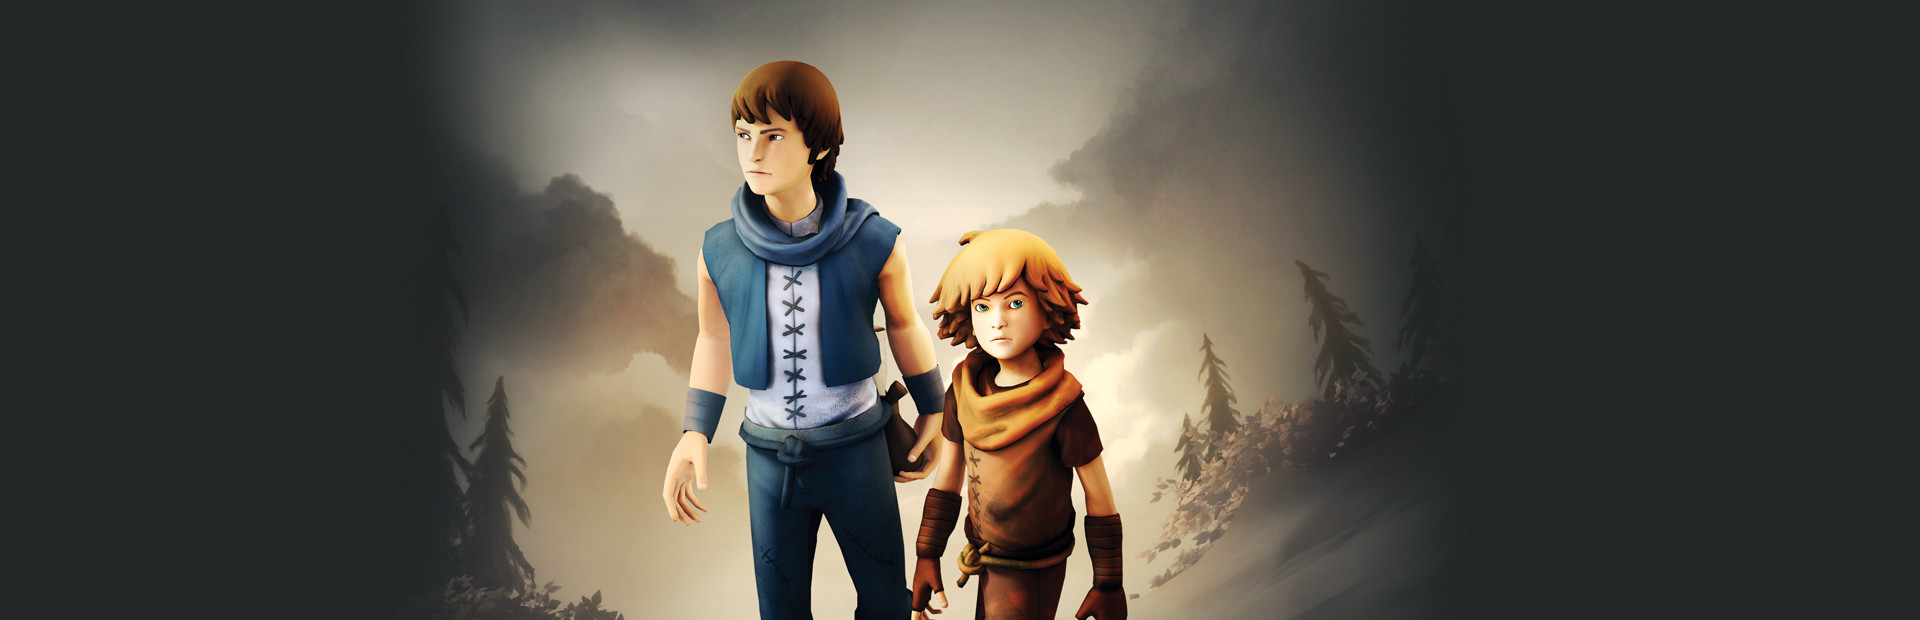 Brothers - A Tale of Two Sons cover image